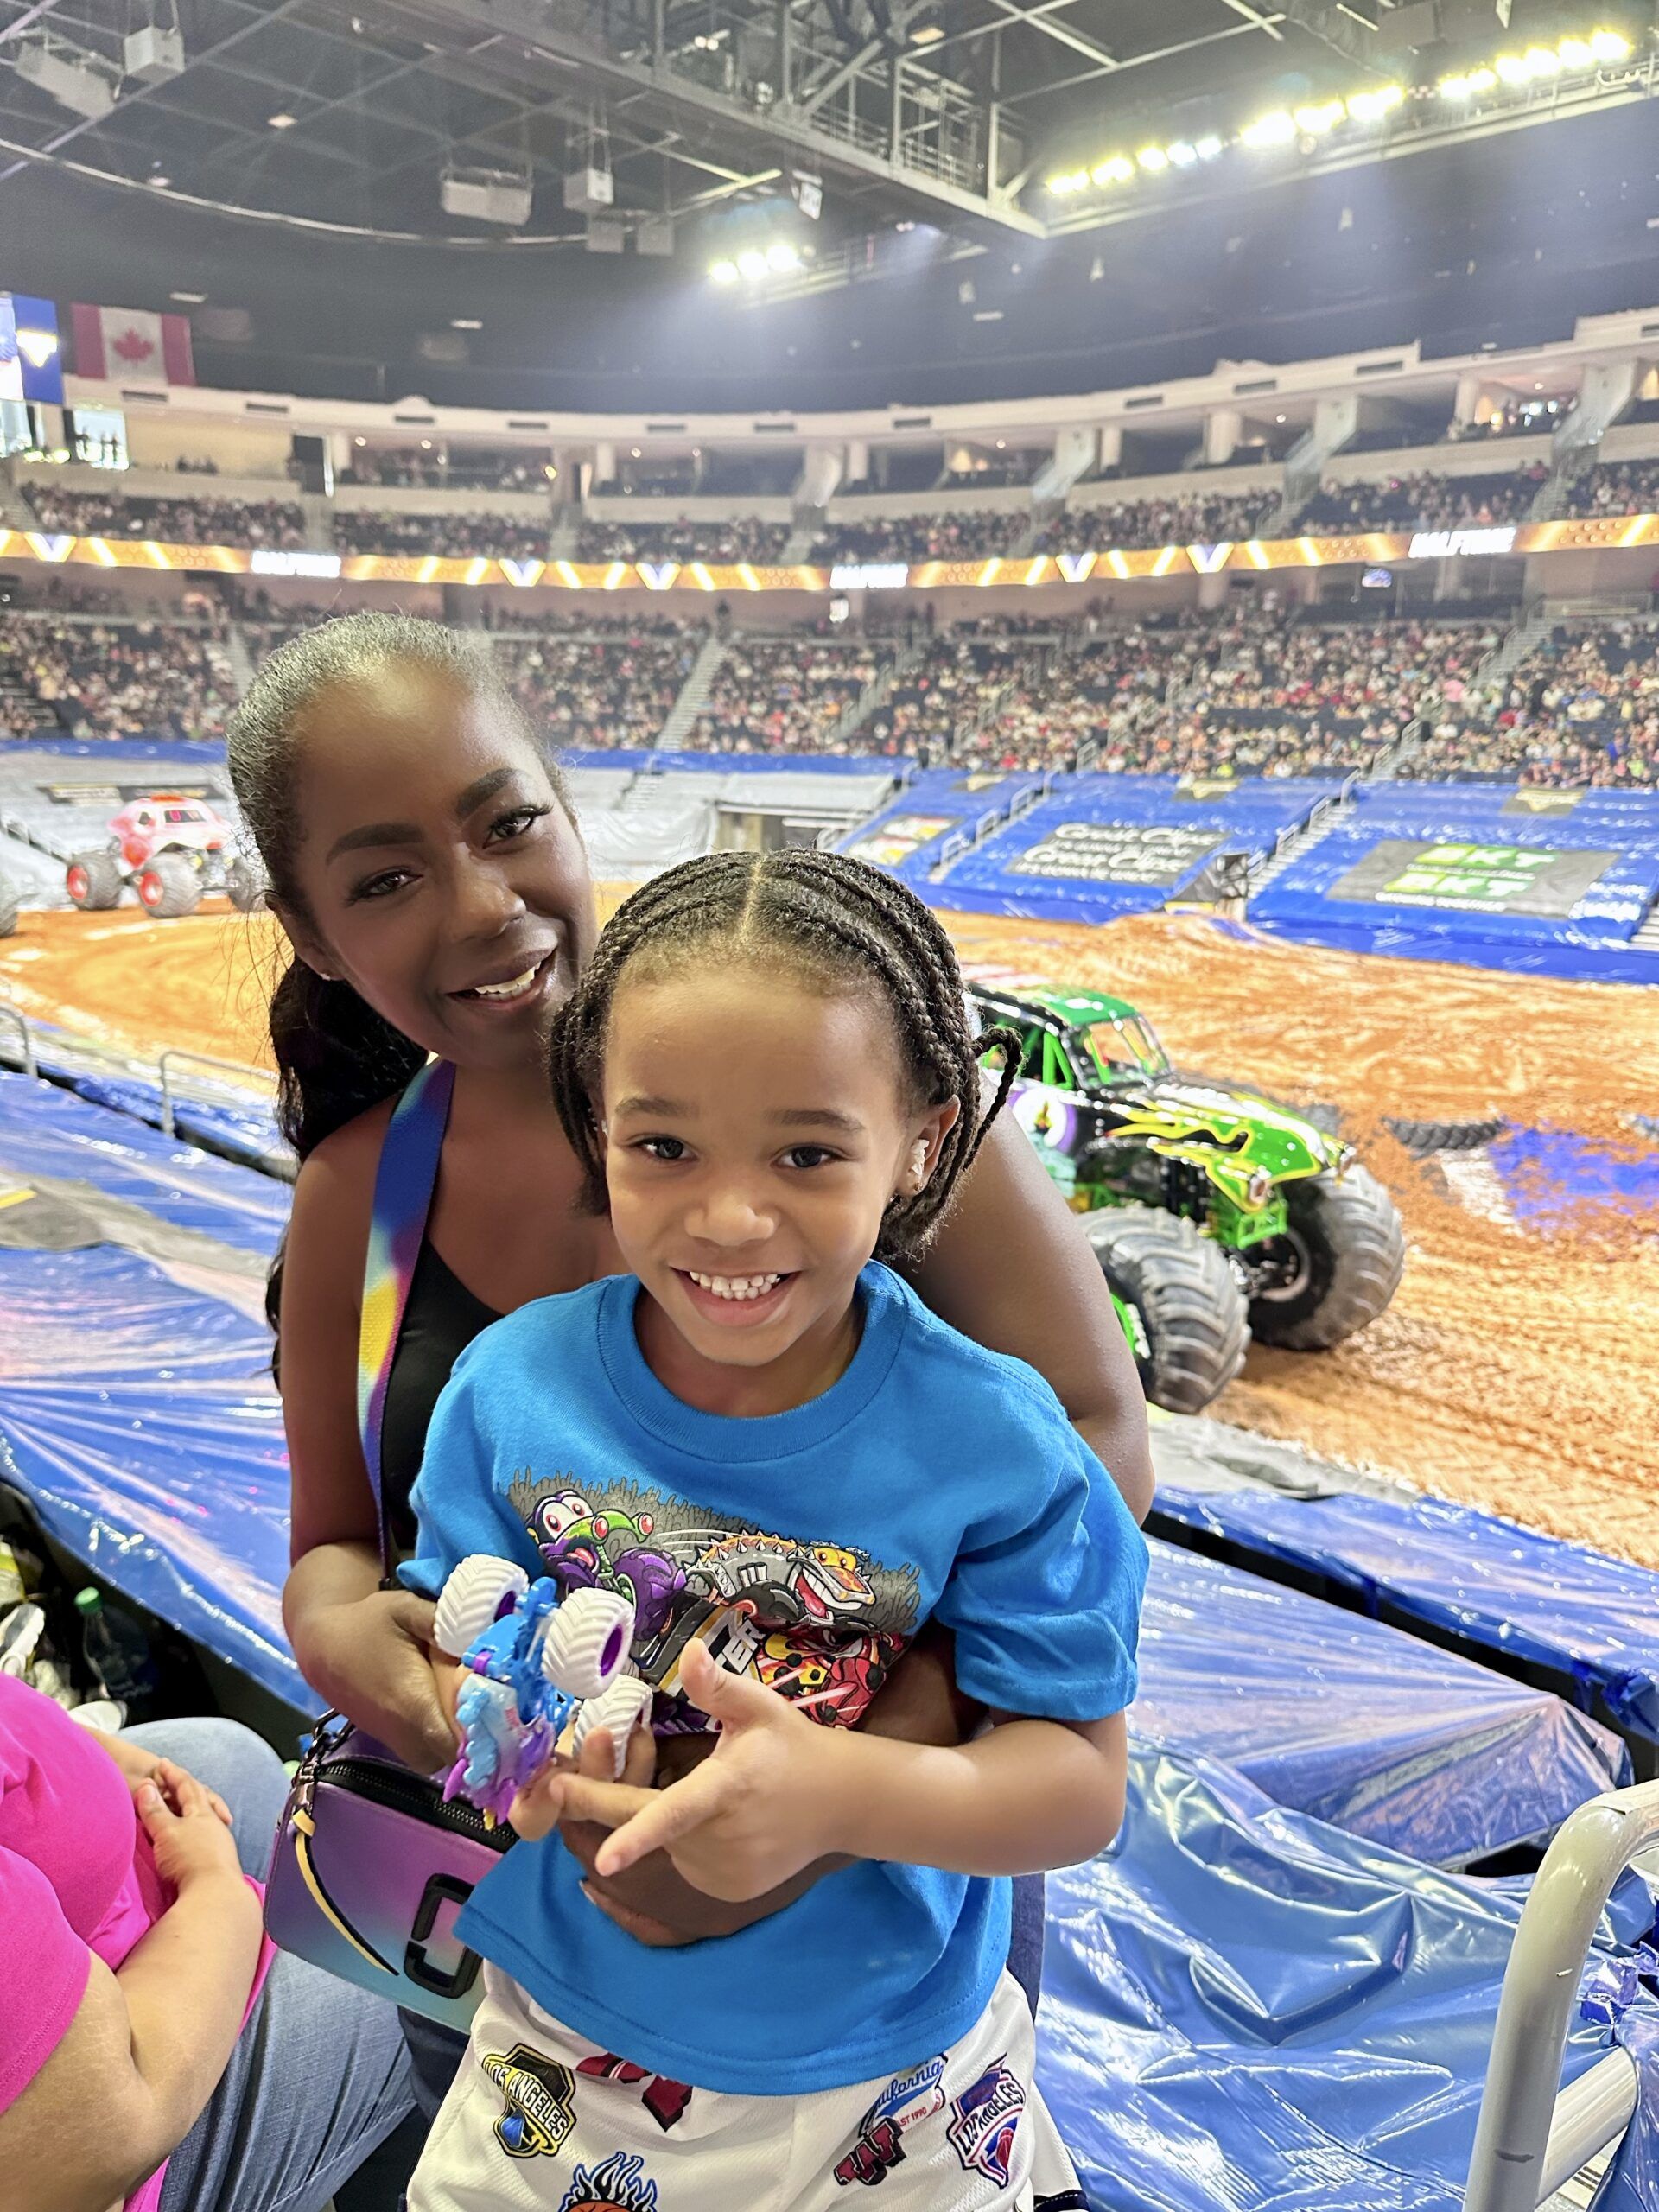 Great Time At Monster Jam In Duluth, Ga